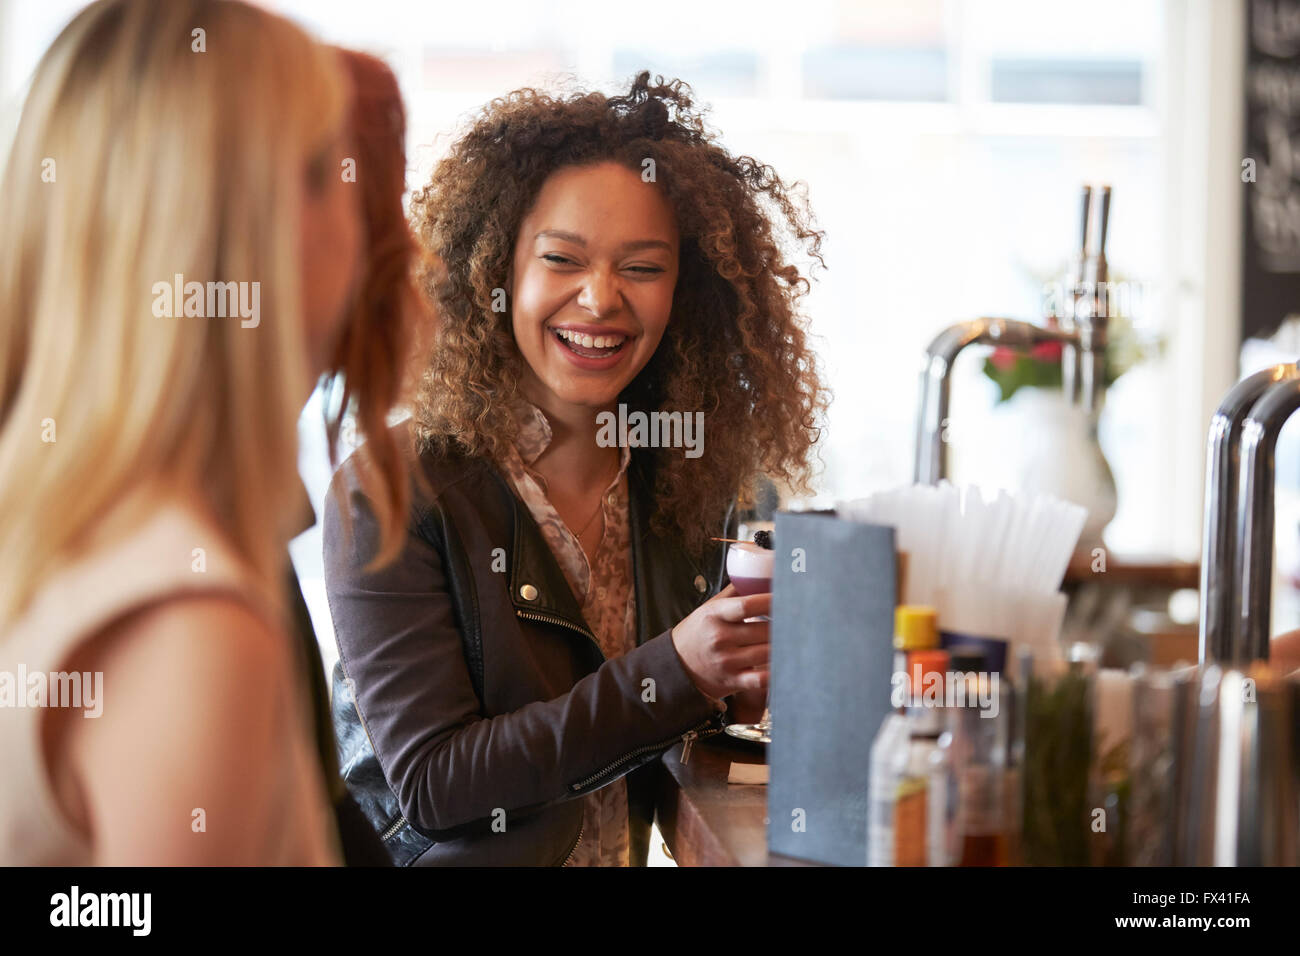 Group Of Female Friends Enjoying Drink In Cocktail Bar Stock Photo